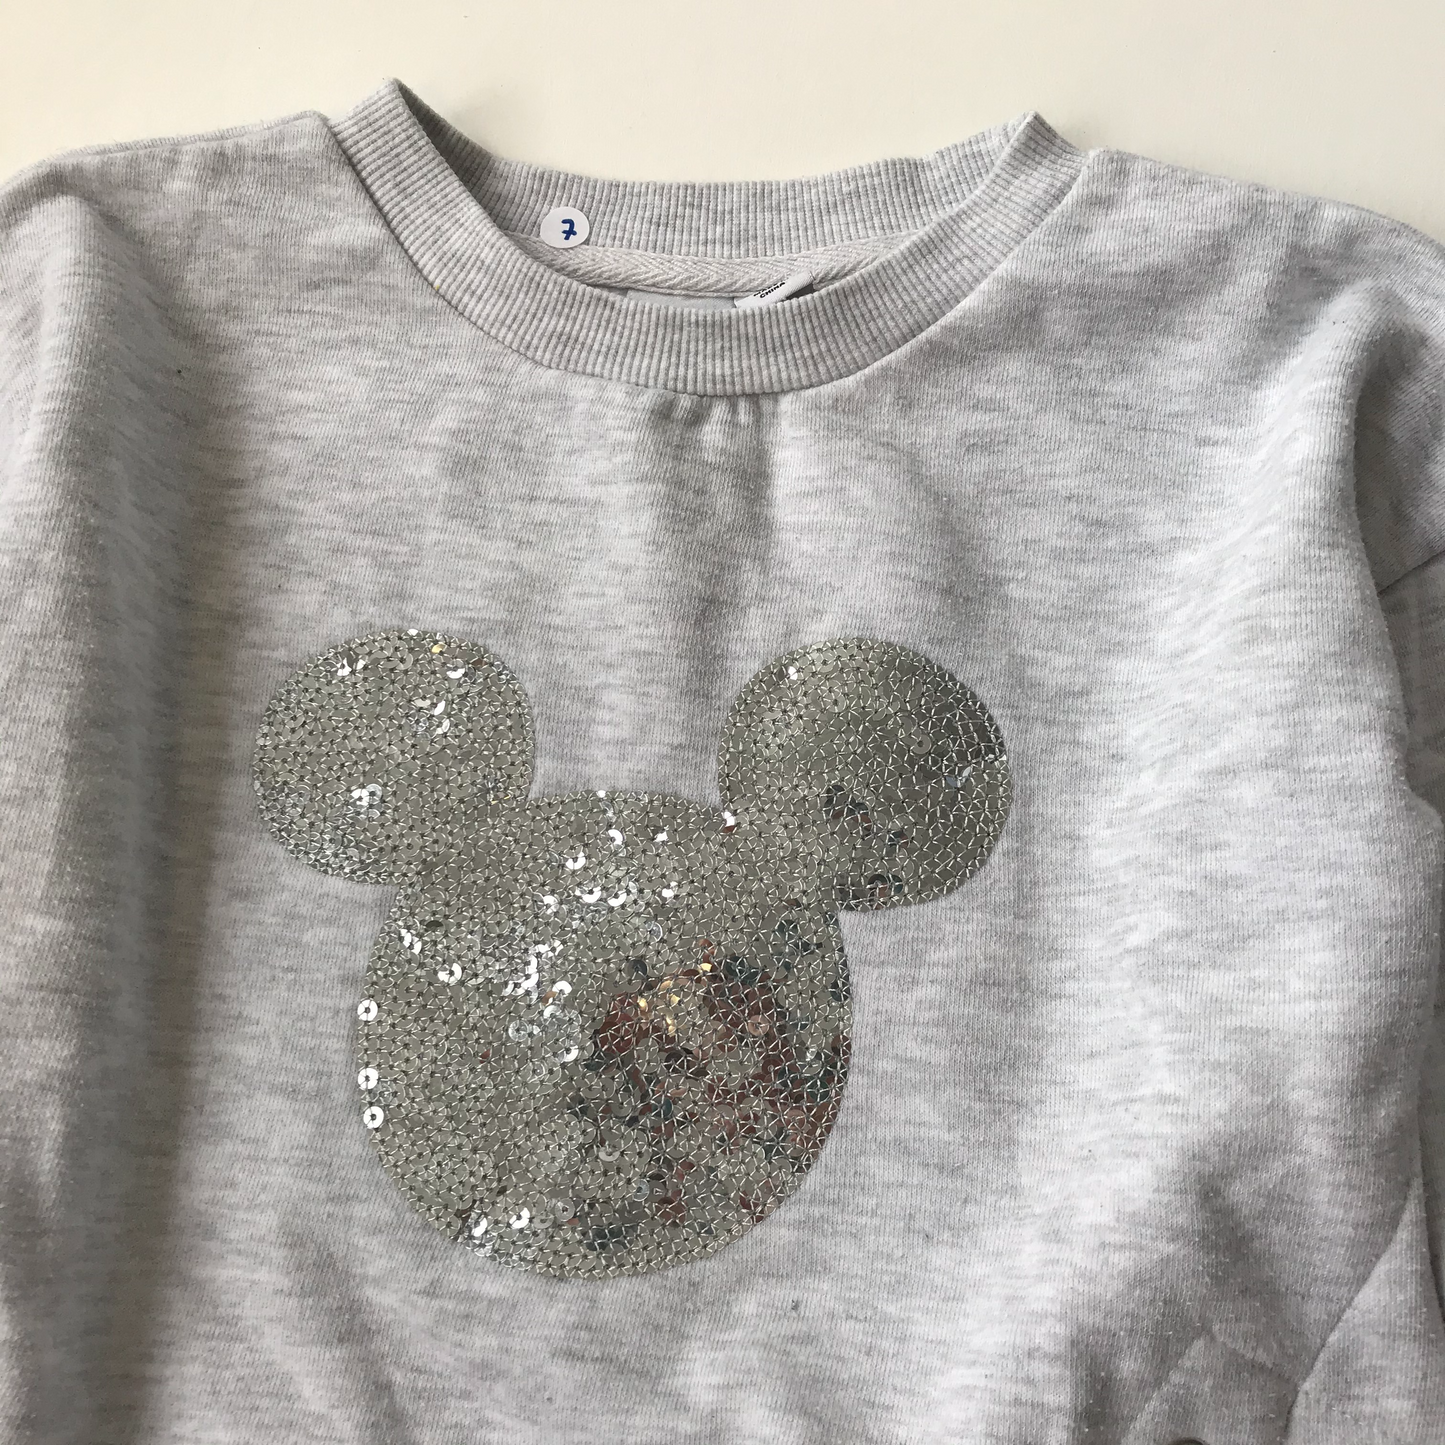 Sweatshirt - Sparkly Mickey Mouse - Age 7